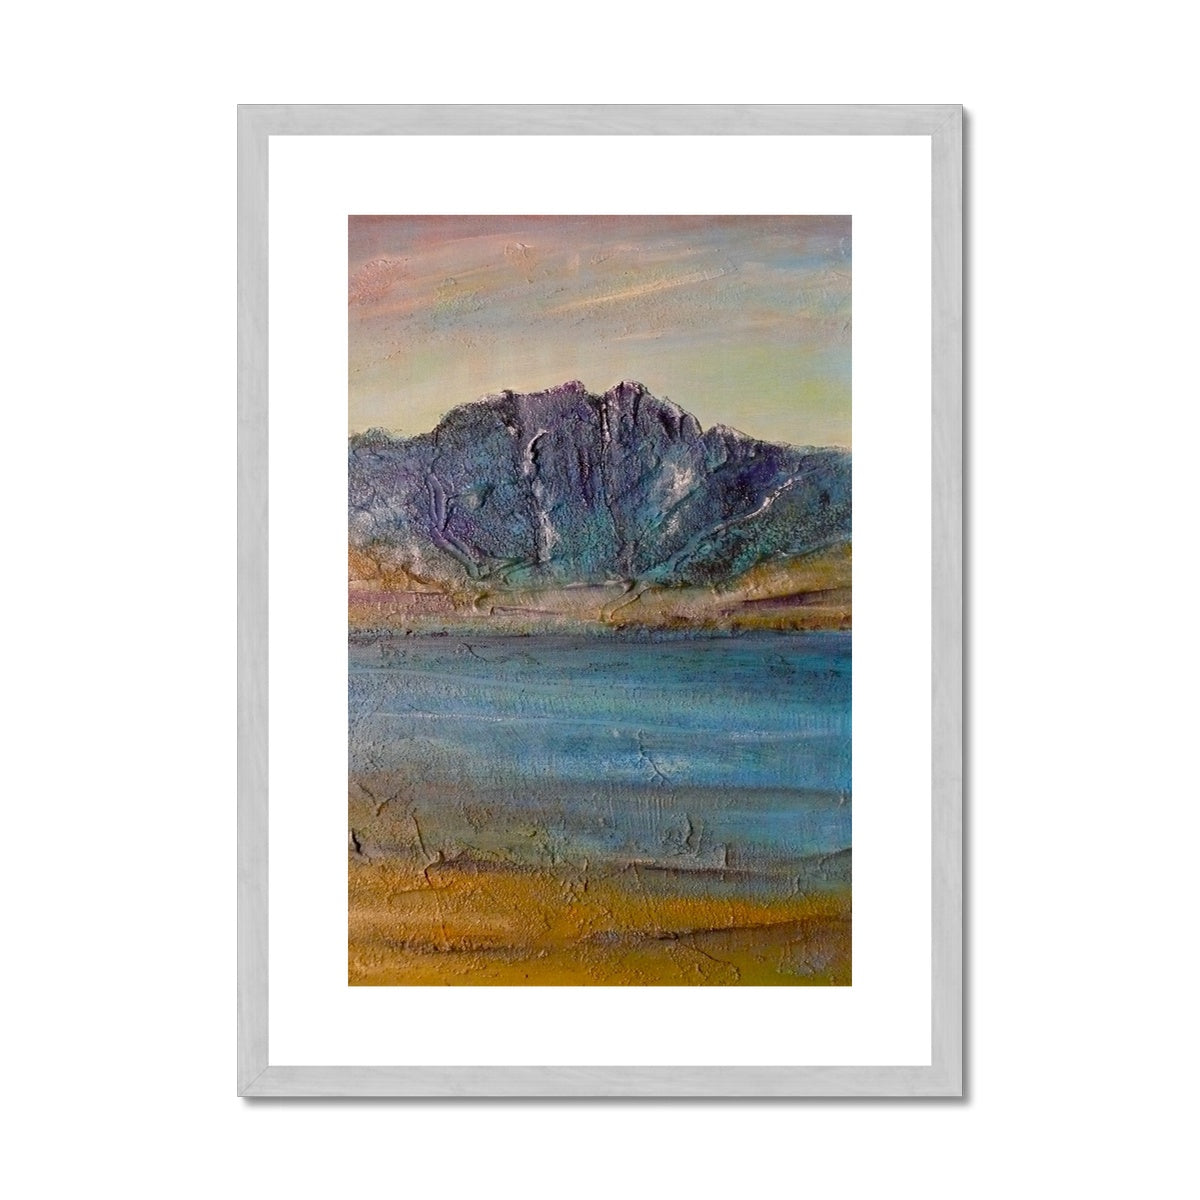 Torridon Painting | Antique Framed & Mounted Prints From Scotland-Antique Framed & Mounted Prints-Scottish Lochs & Mountains Art Gallery-A2 Portrait-Silver Frame-Paintings, Prints, Homeware, Art Gifts From Scotland By Scottish Artist Kevin Hunter